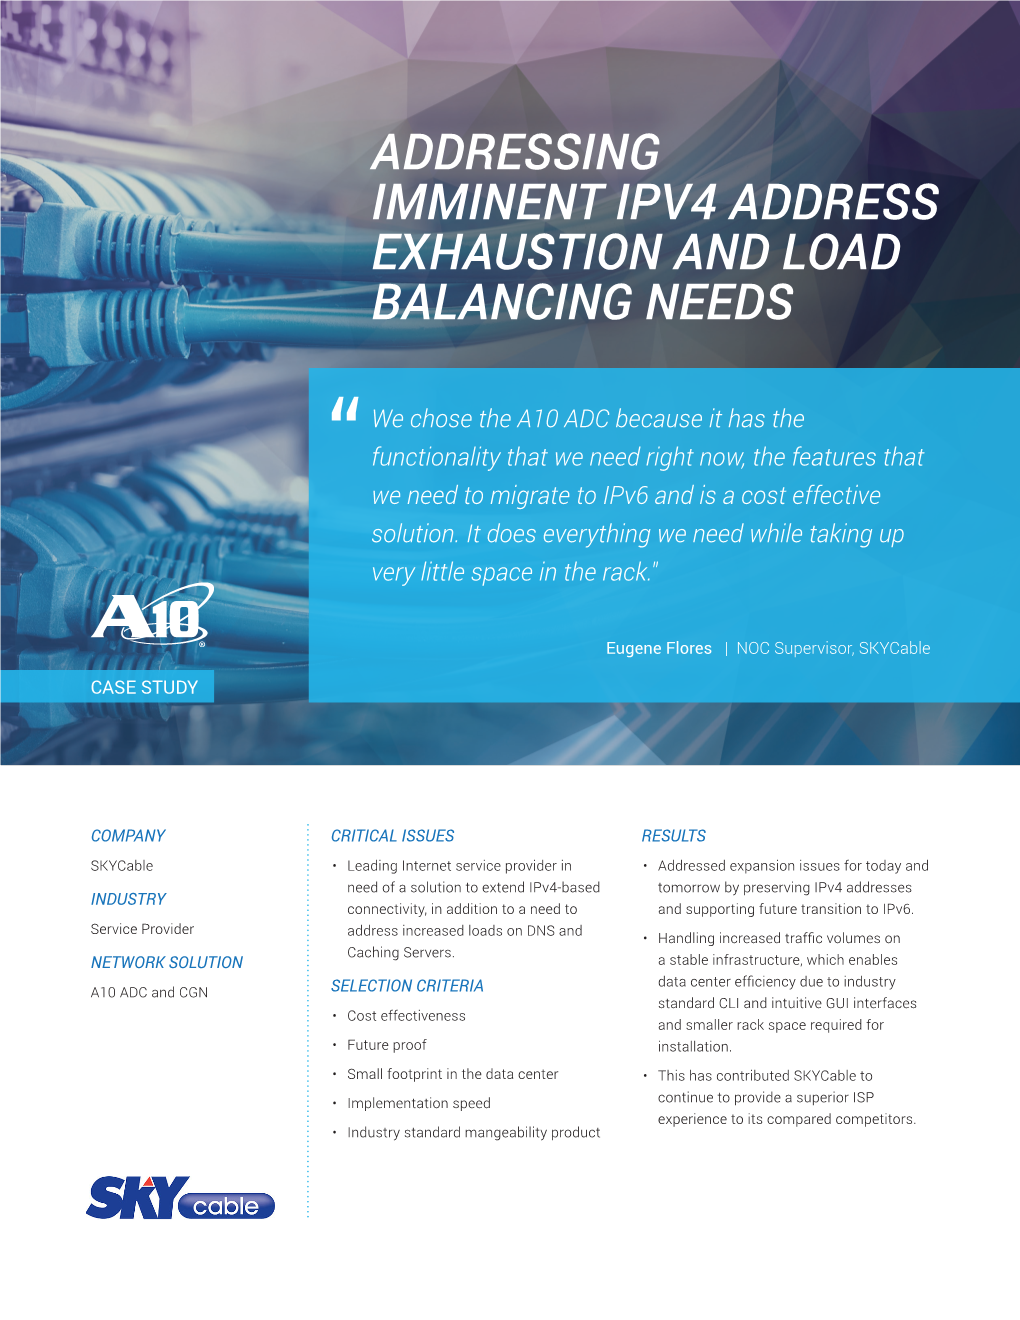 Addressing Imminent Ipv4 Address Exhaustion and Load Balancing Needs